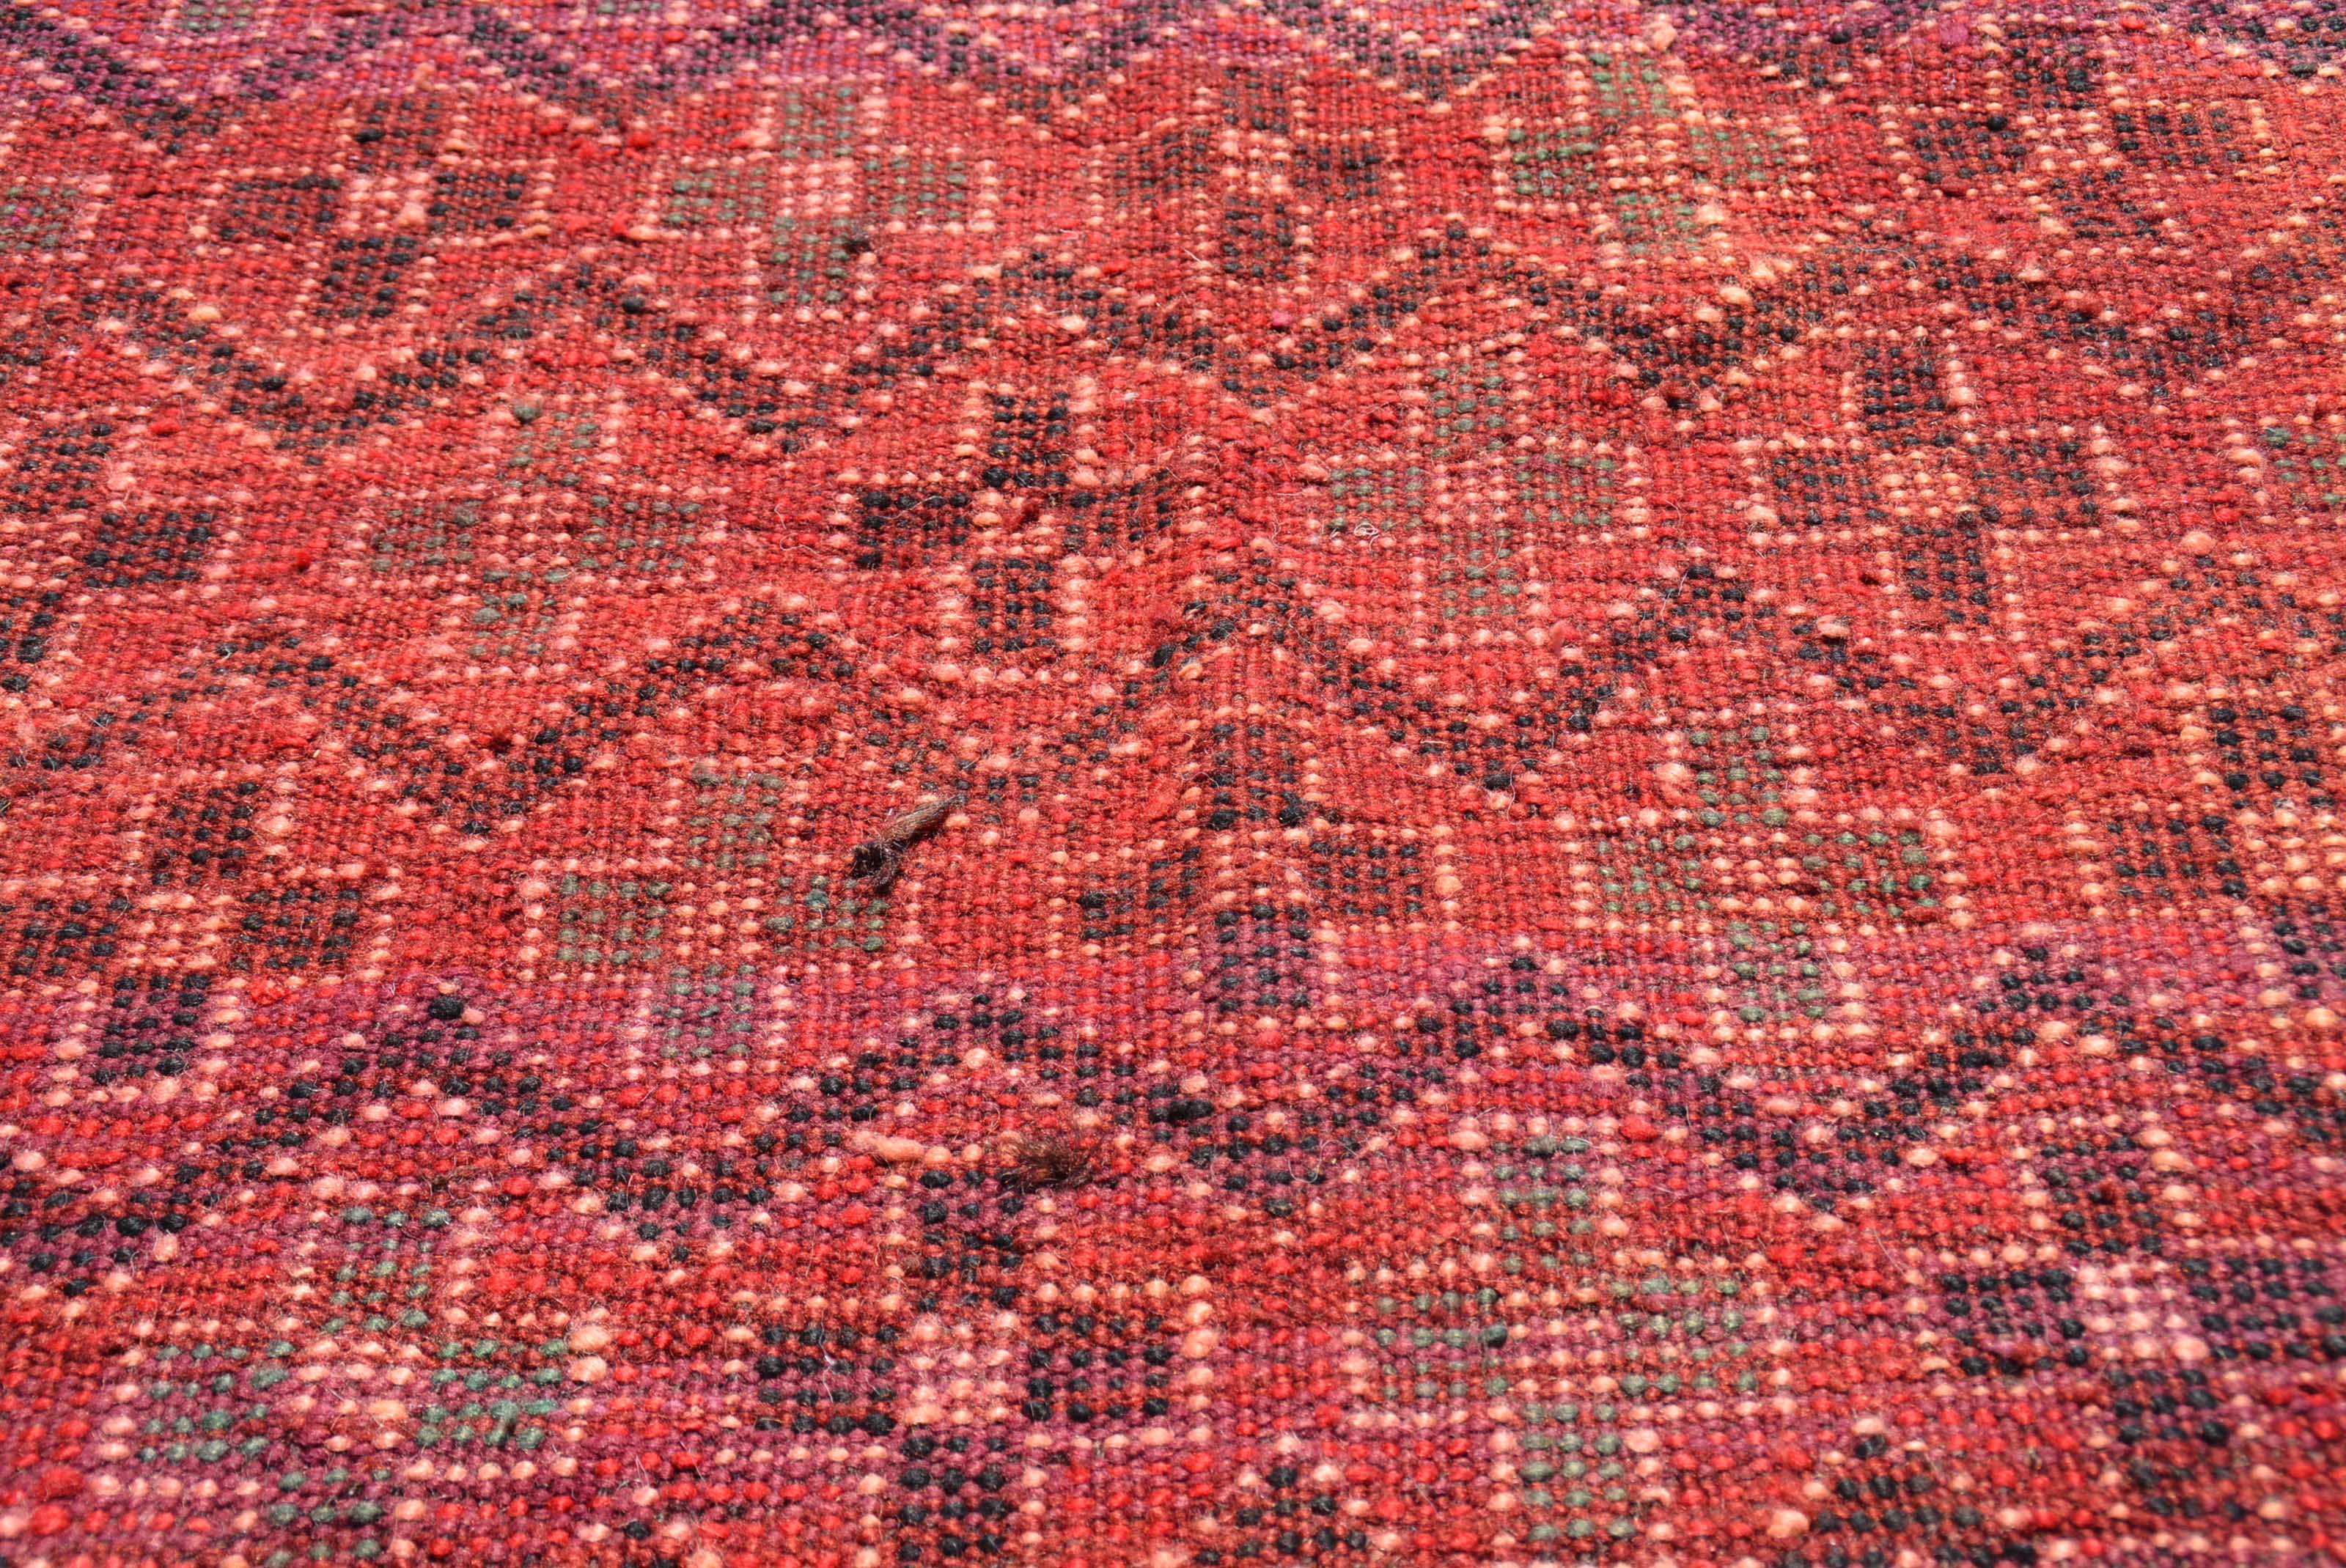 Vintage Moroccan Rug Red Vintage Moroccan Rug Illuminate Collective